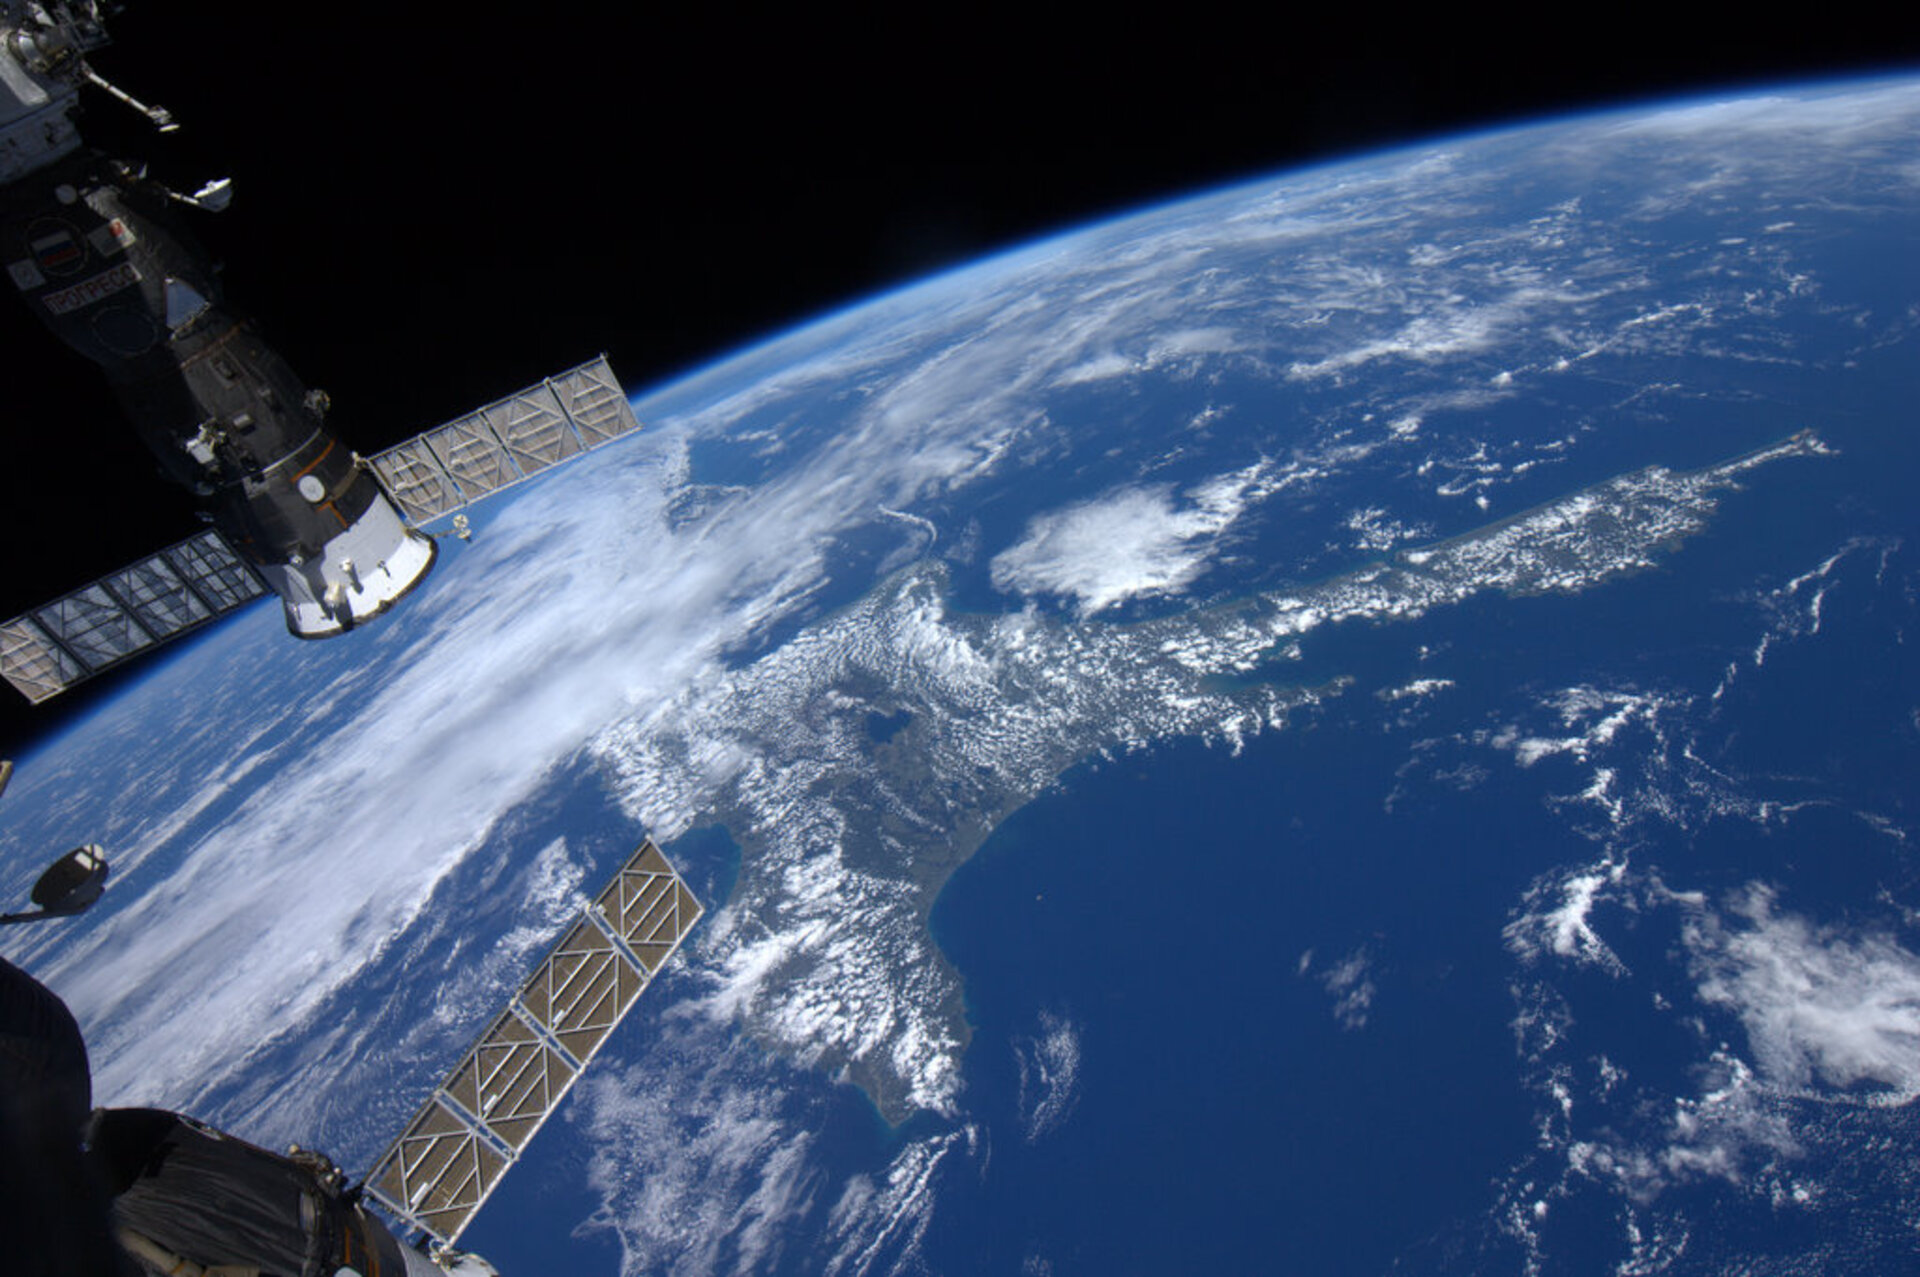 North Island, New Zealand, as seen from the ISS